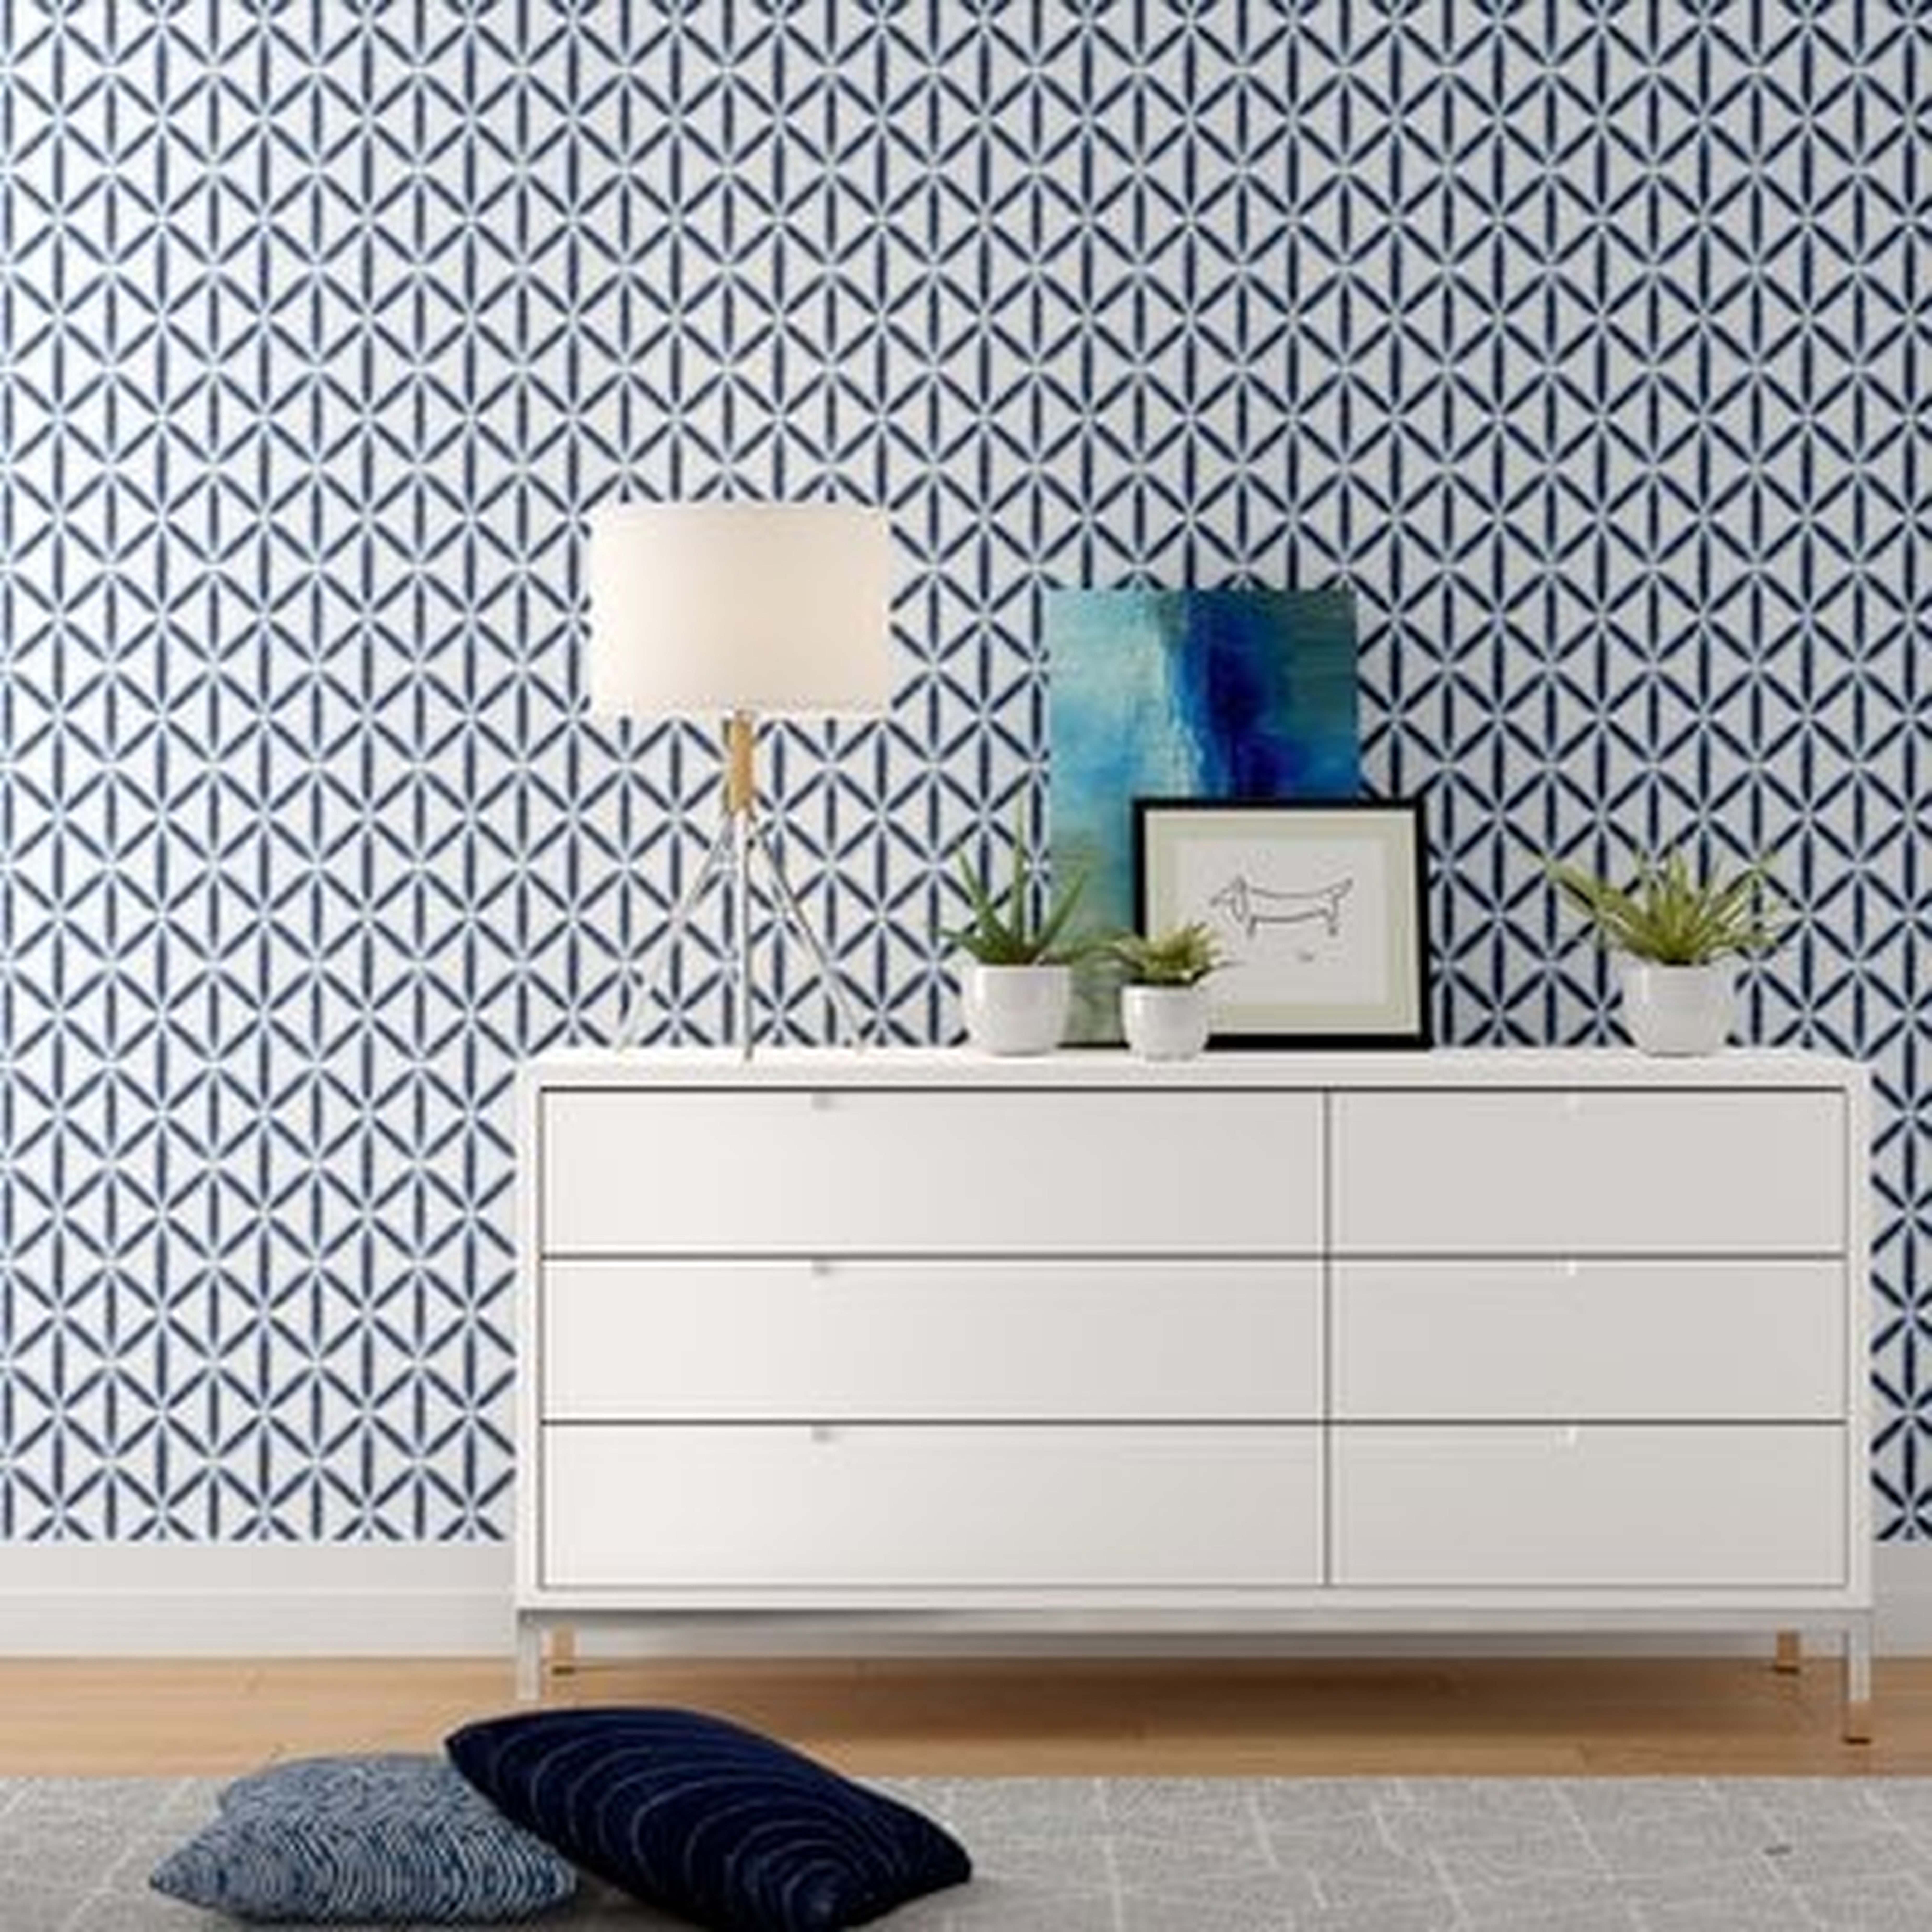 Nathaly 18' L x 20.5" W Texture Peel and Stick Wallpaper Roll - Birch Lane